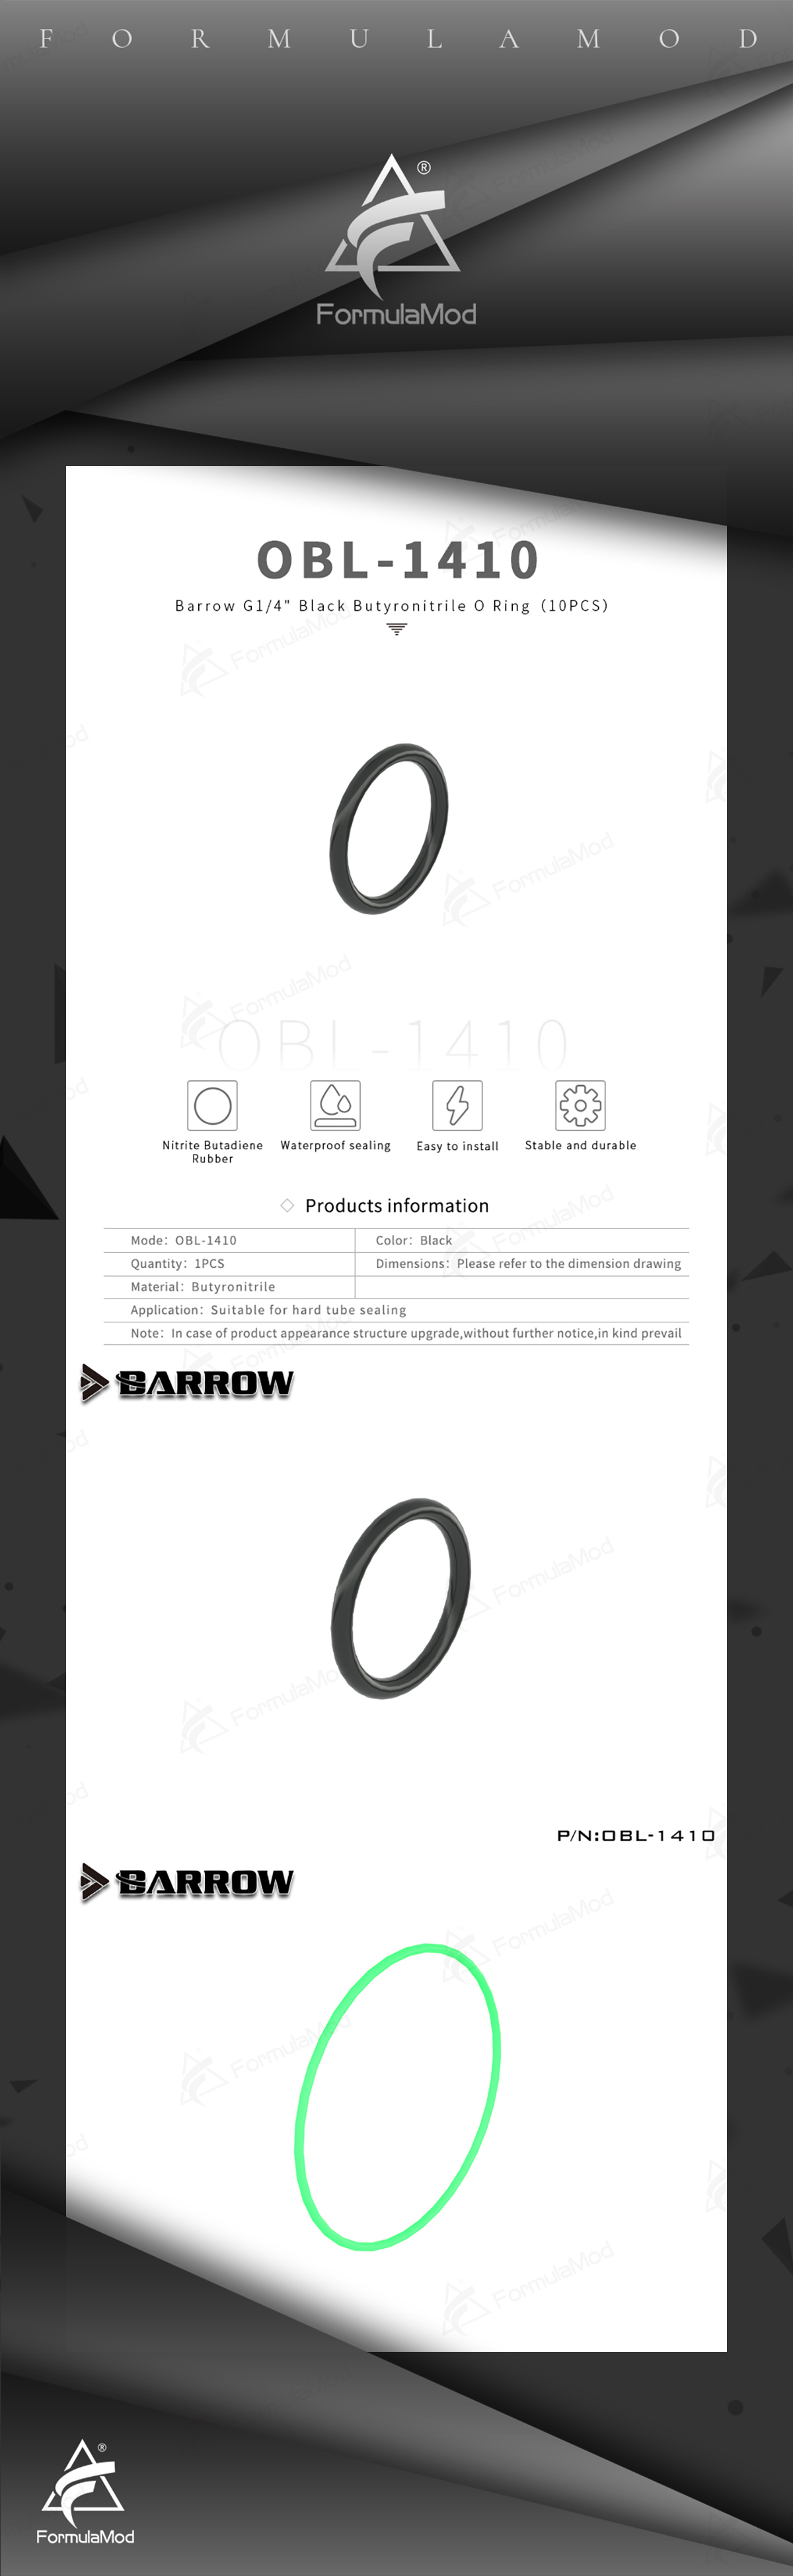 Barrow Silicone O-rings, For G1/4 Interface, For OD14/16mm Fittings, Water Cooling Practical Accessories, OBL/OG  